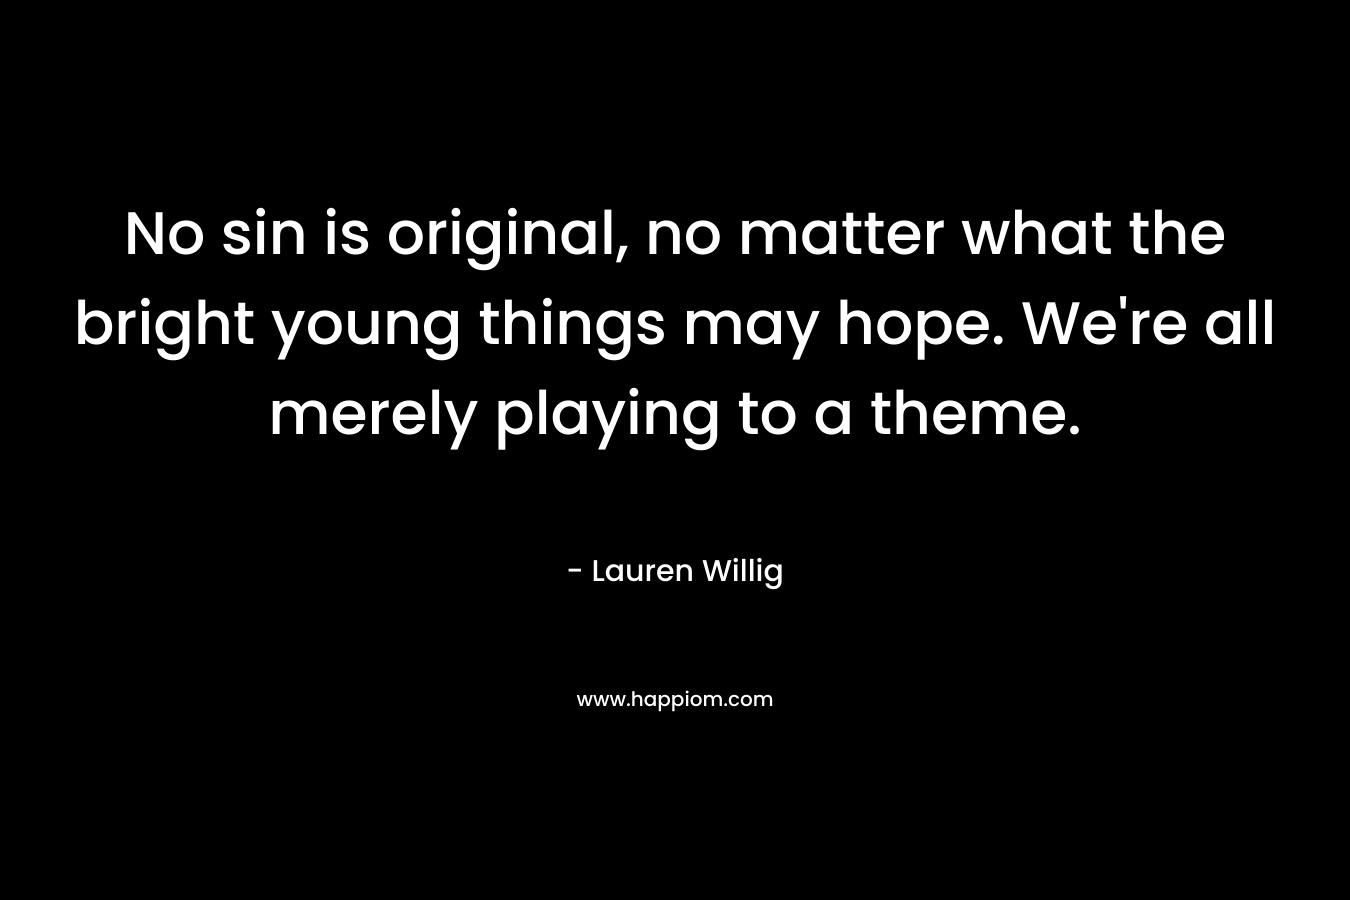 No sin is original, no matter what the bright young things may hope. We’re all merely playing to a theme. – Lauren Willig